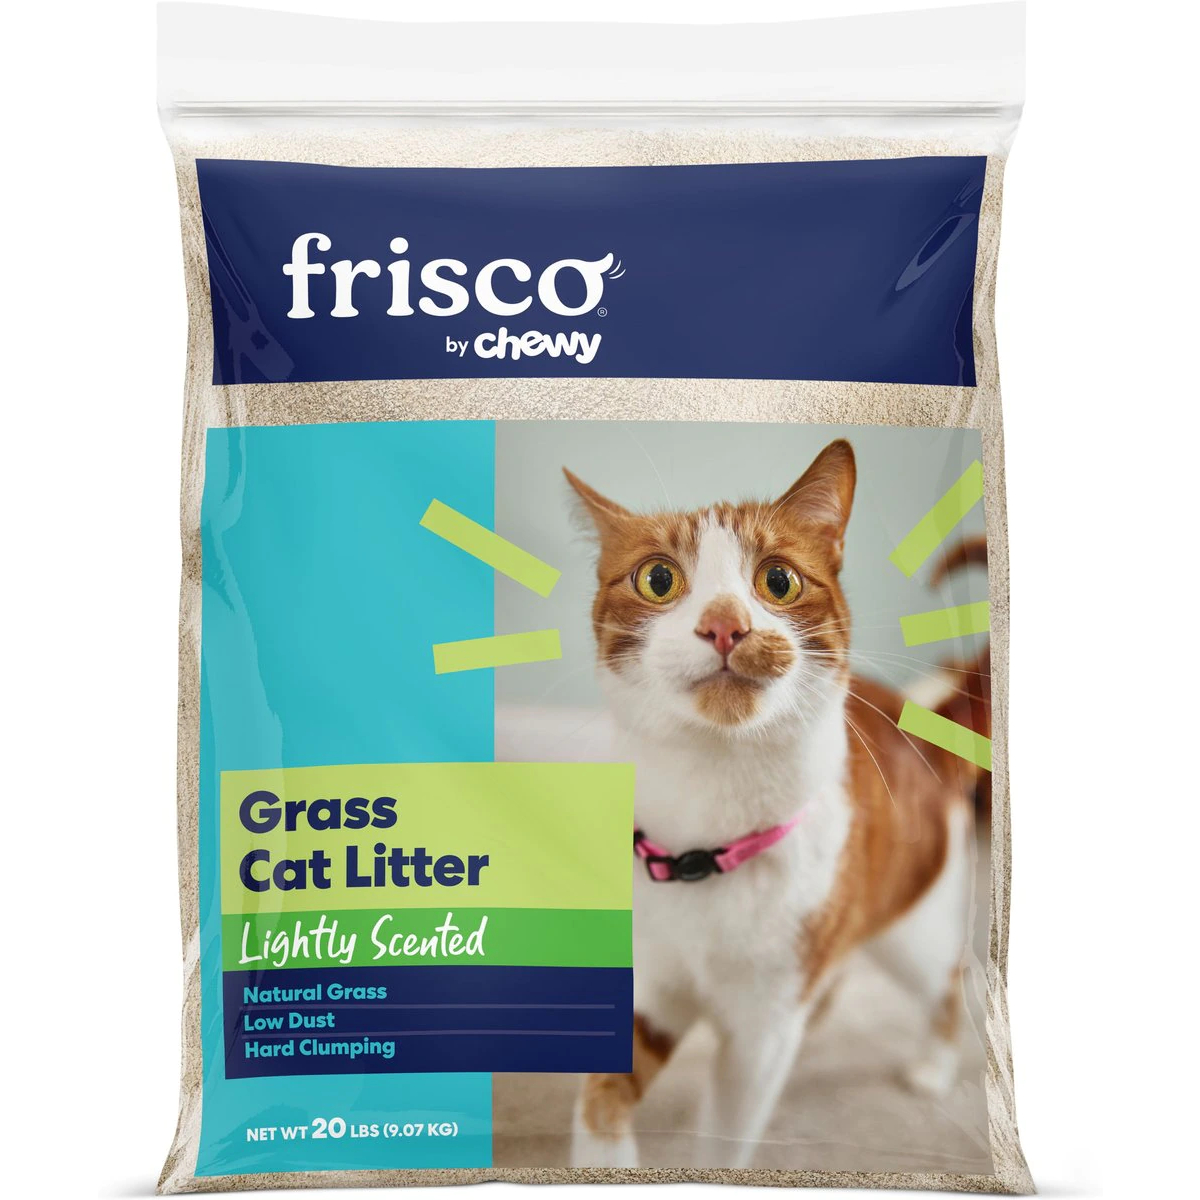 Frisco Natural Lightly Scented Clumping Grass Cat Litter New